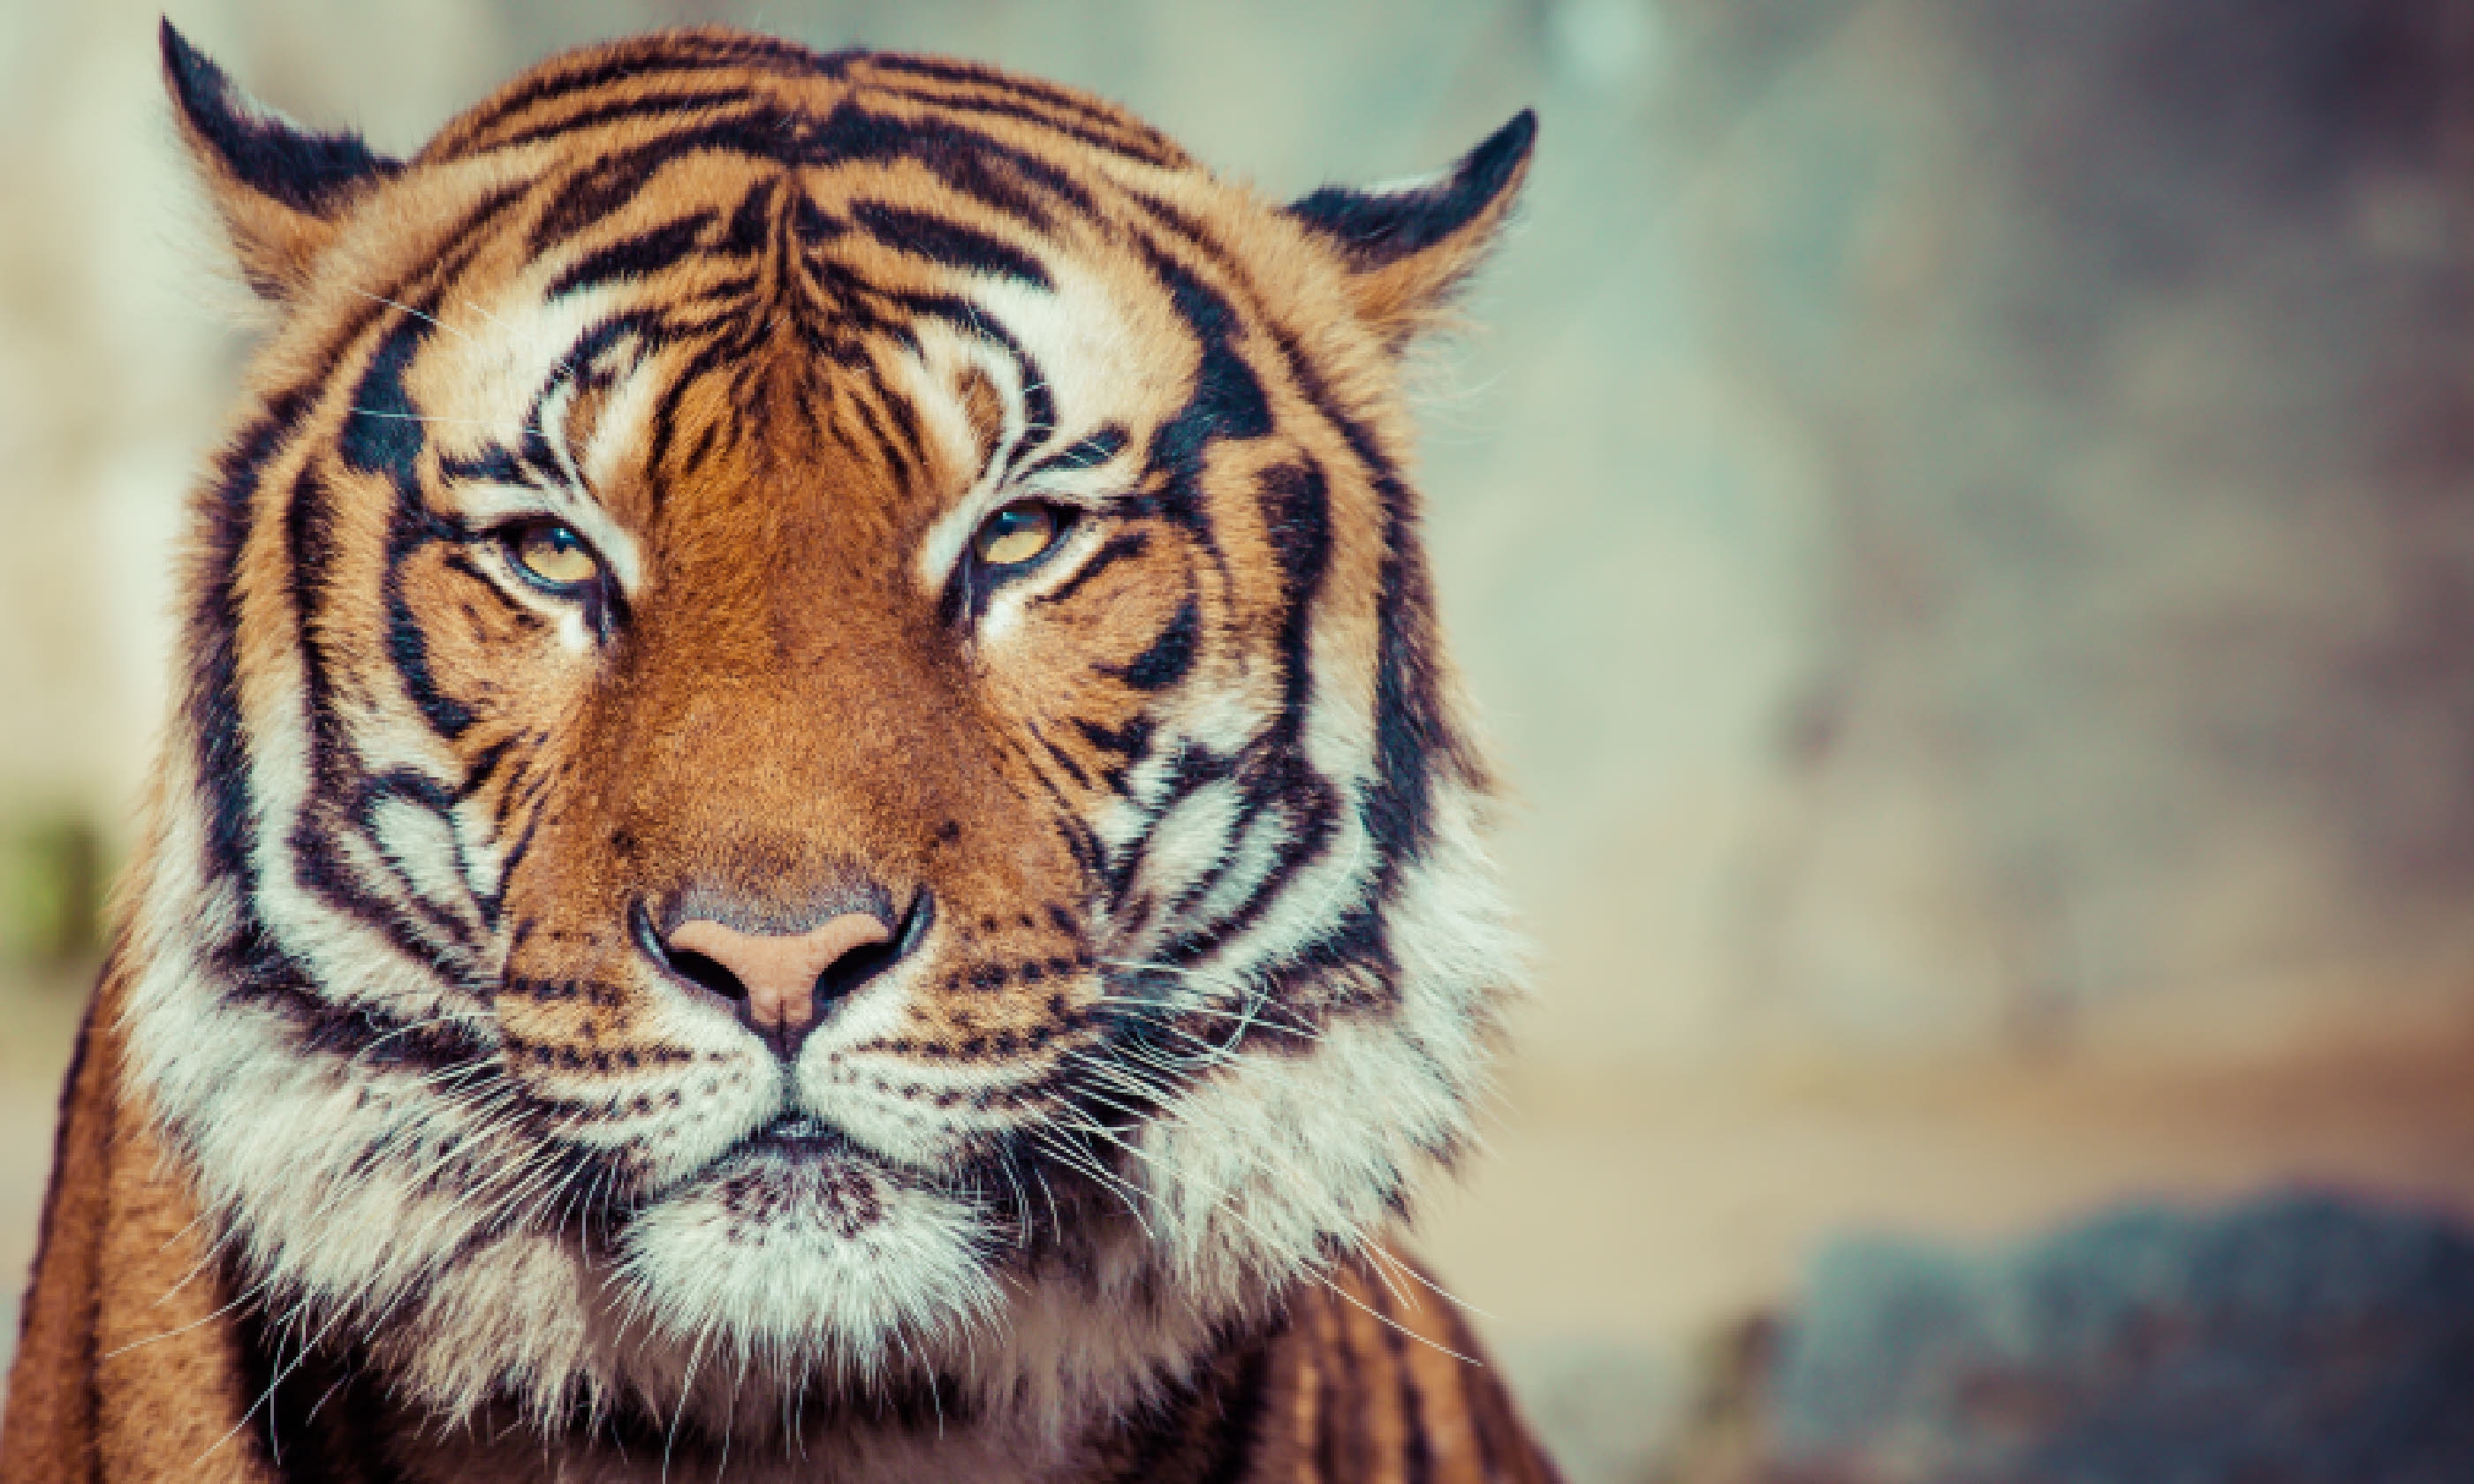 Close up of a tiger (Shutterstock: see below)